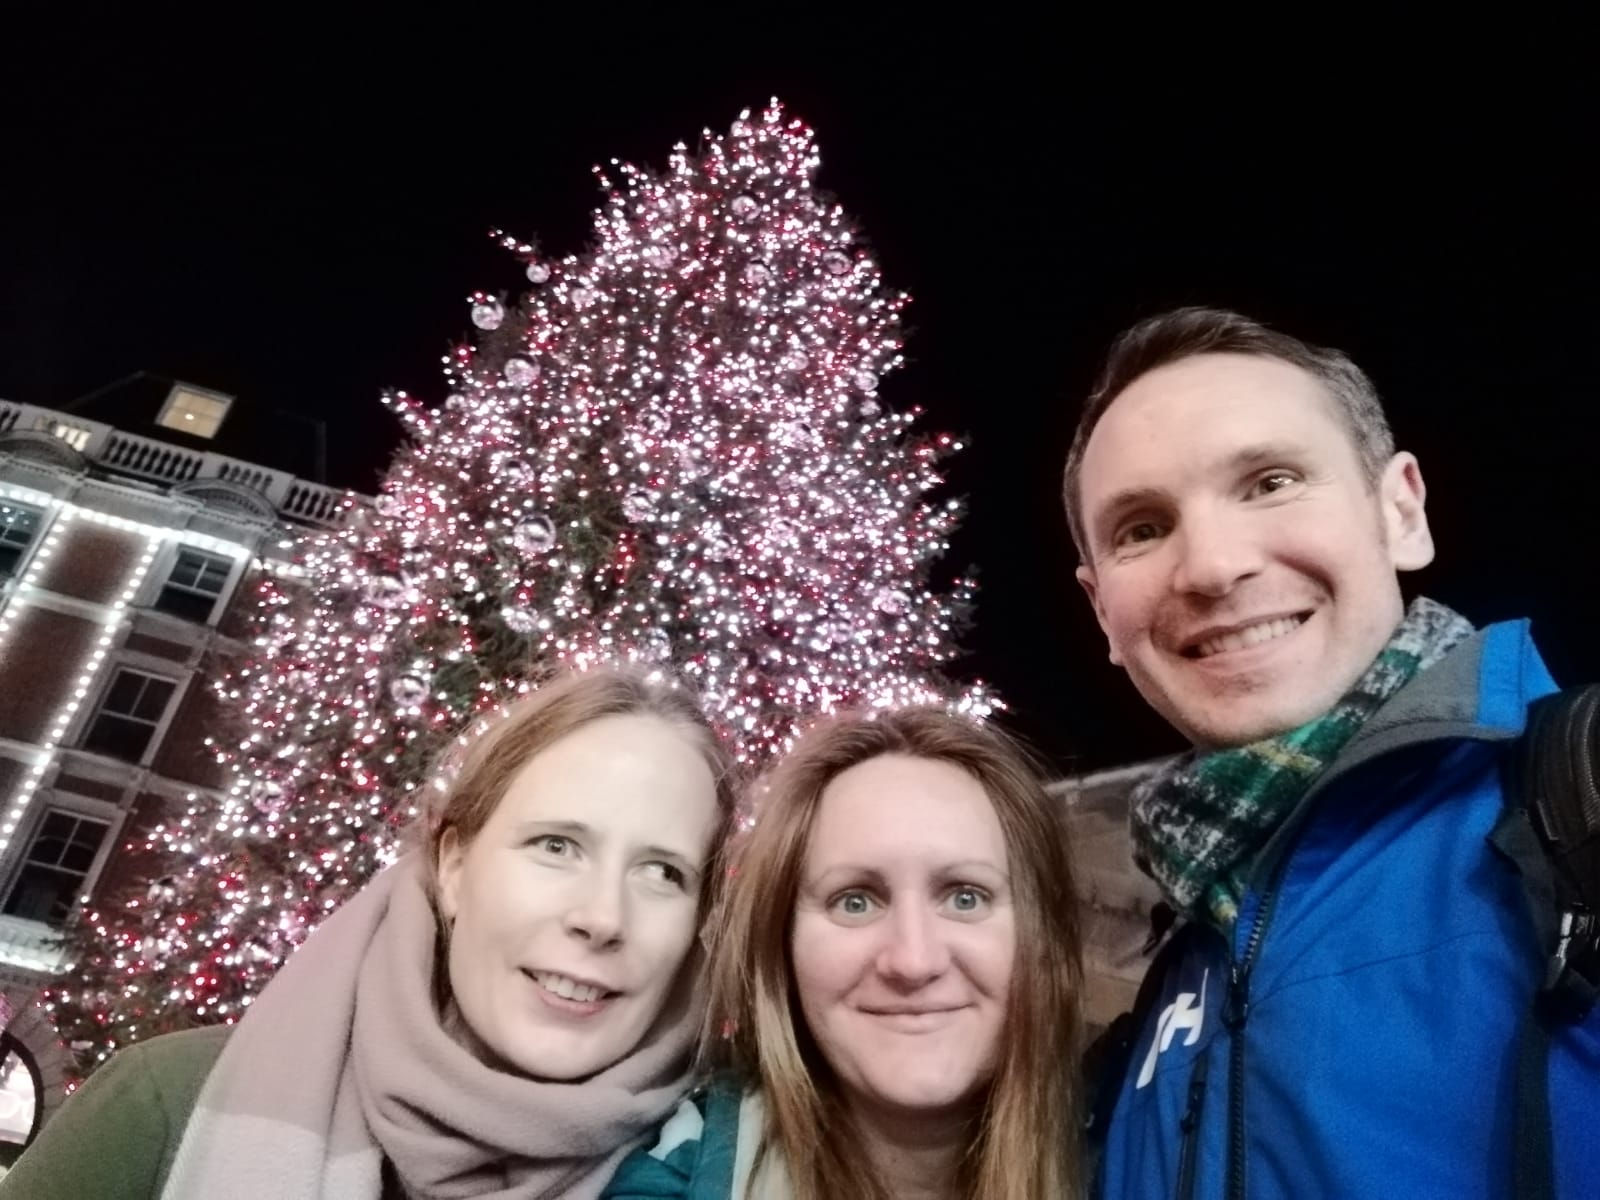 Us and the Christmas Tree in Covent Garden, 2019